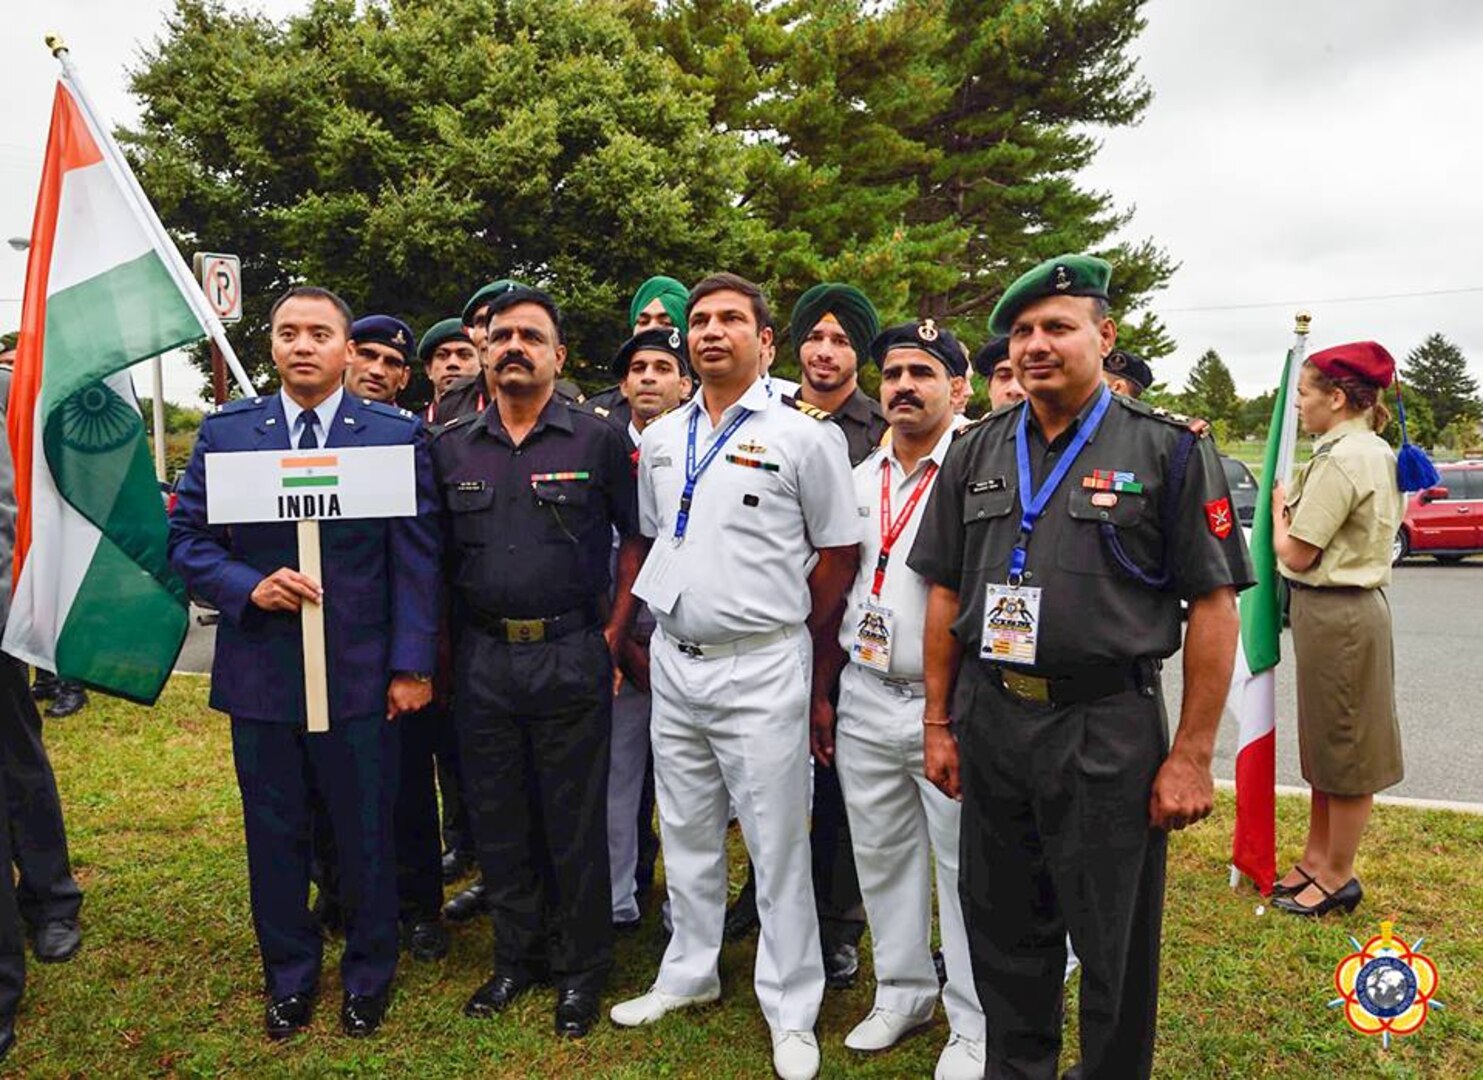 The Indian Delegation lining up during the Opening Ceremony of the 29th CISM World Military Wrestling Championship at Joint Base McGuire-Dix-Lakehurst (MDL), New Jersey 1-8 October